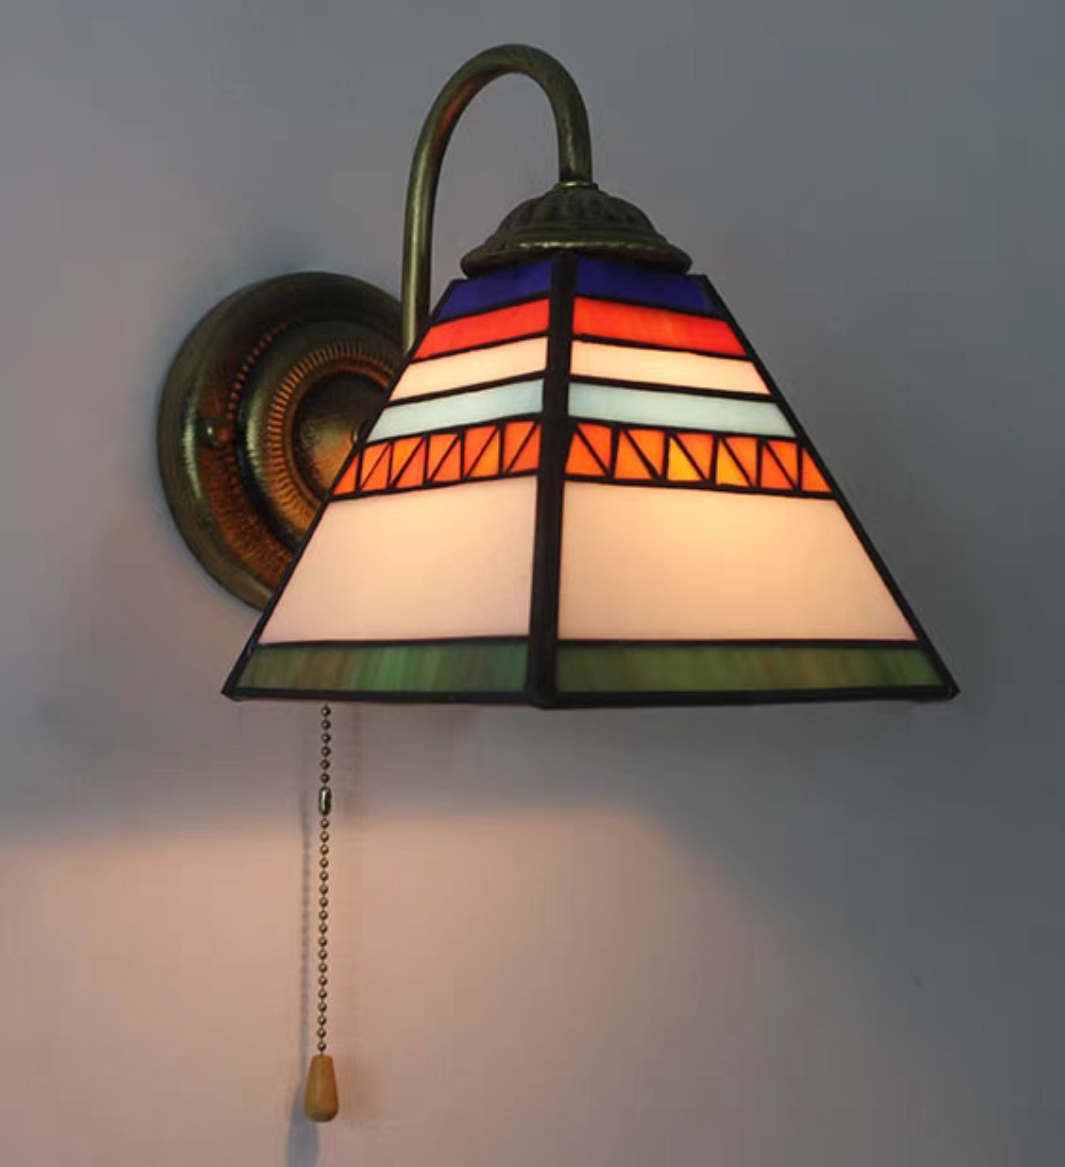 Olivia Lamps Tiffany Retro Stained Glass Wall Lights for Hallway/Living Room/Foyer/Bedroom